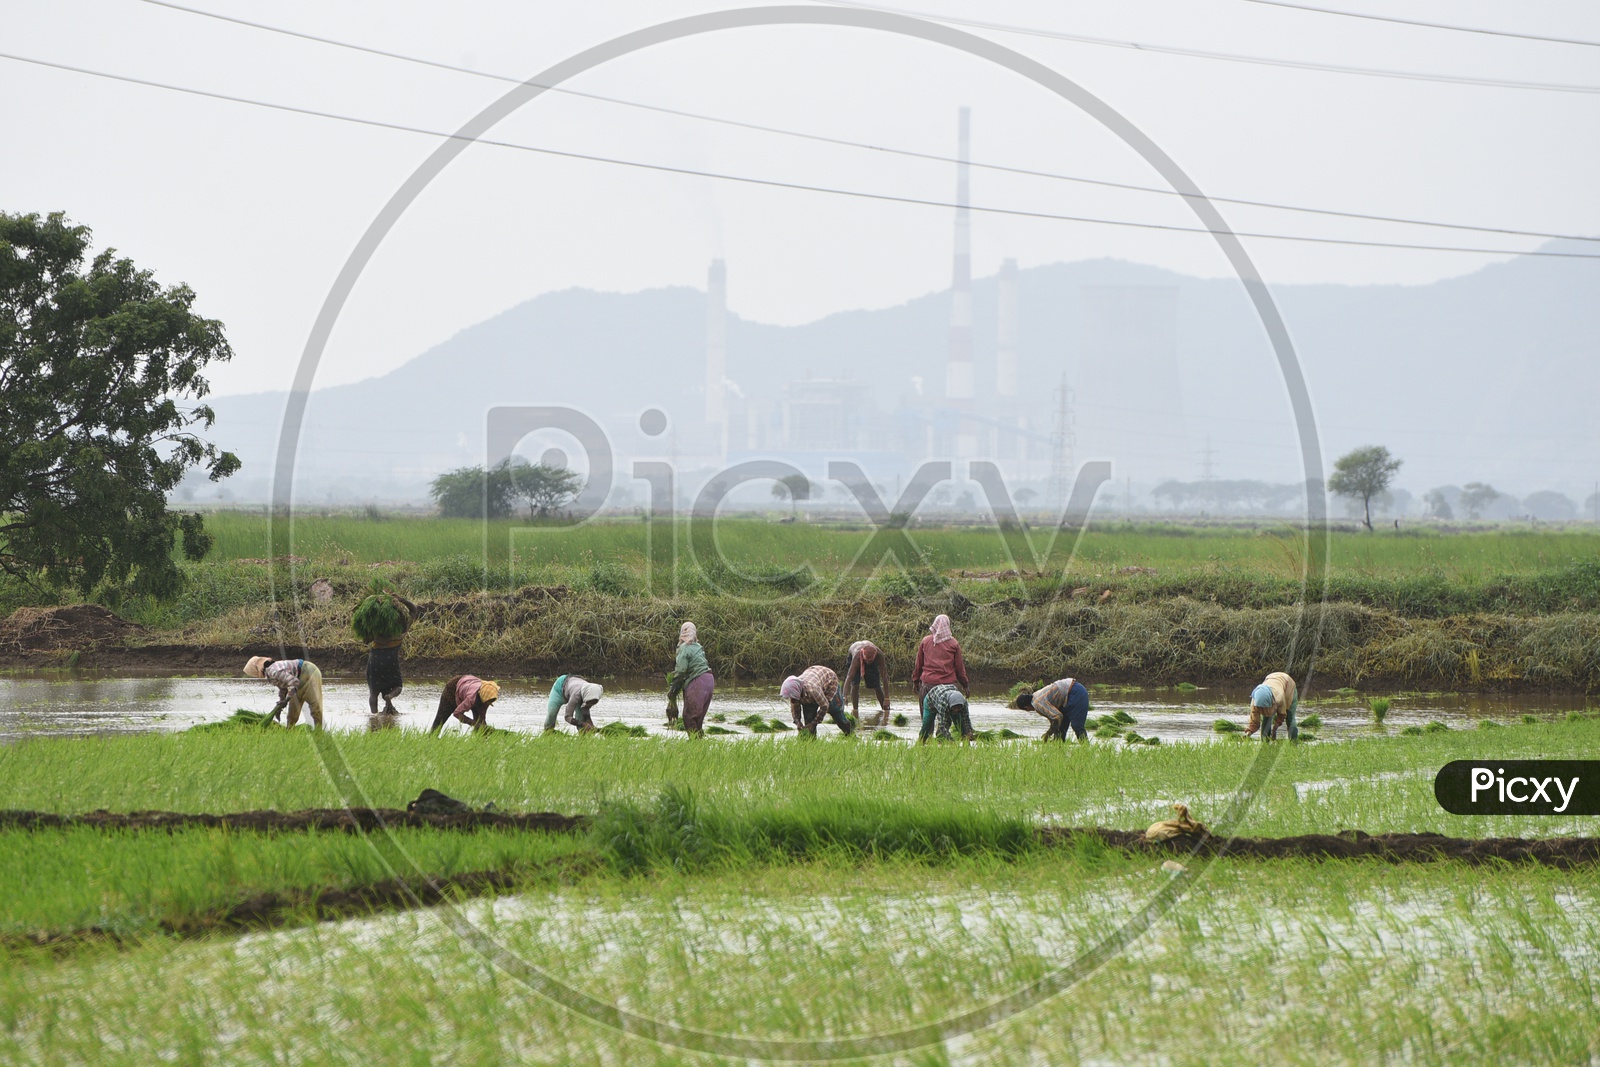 Group of Indian farmers working in the Agricultural field